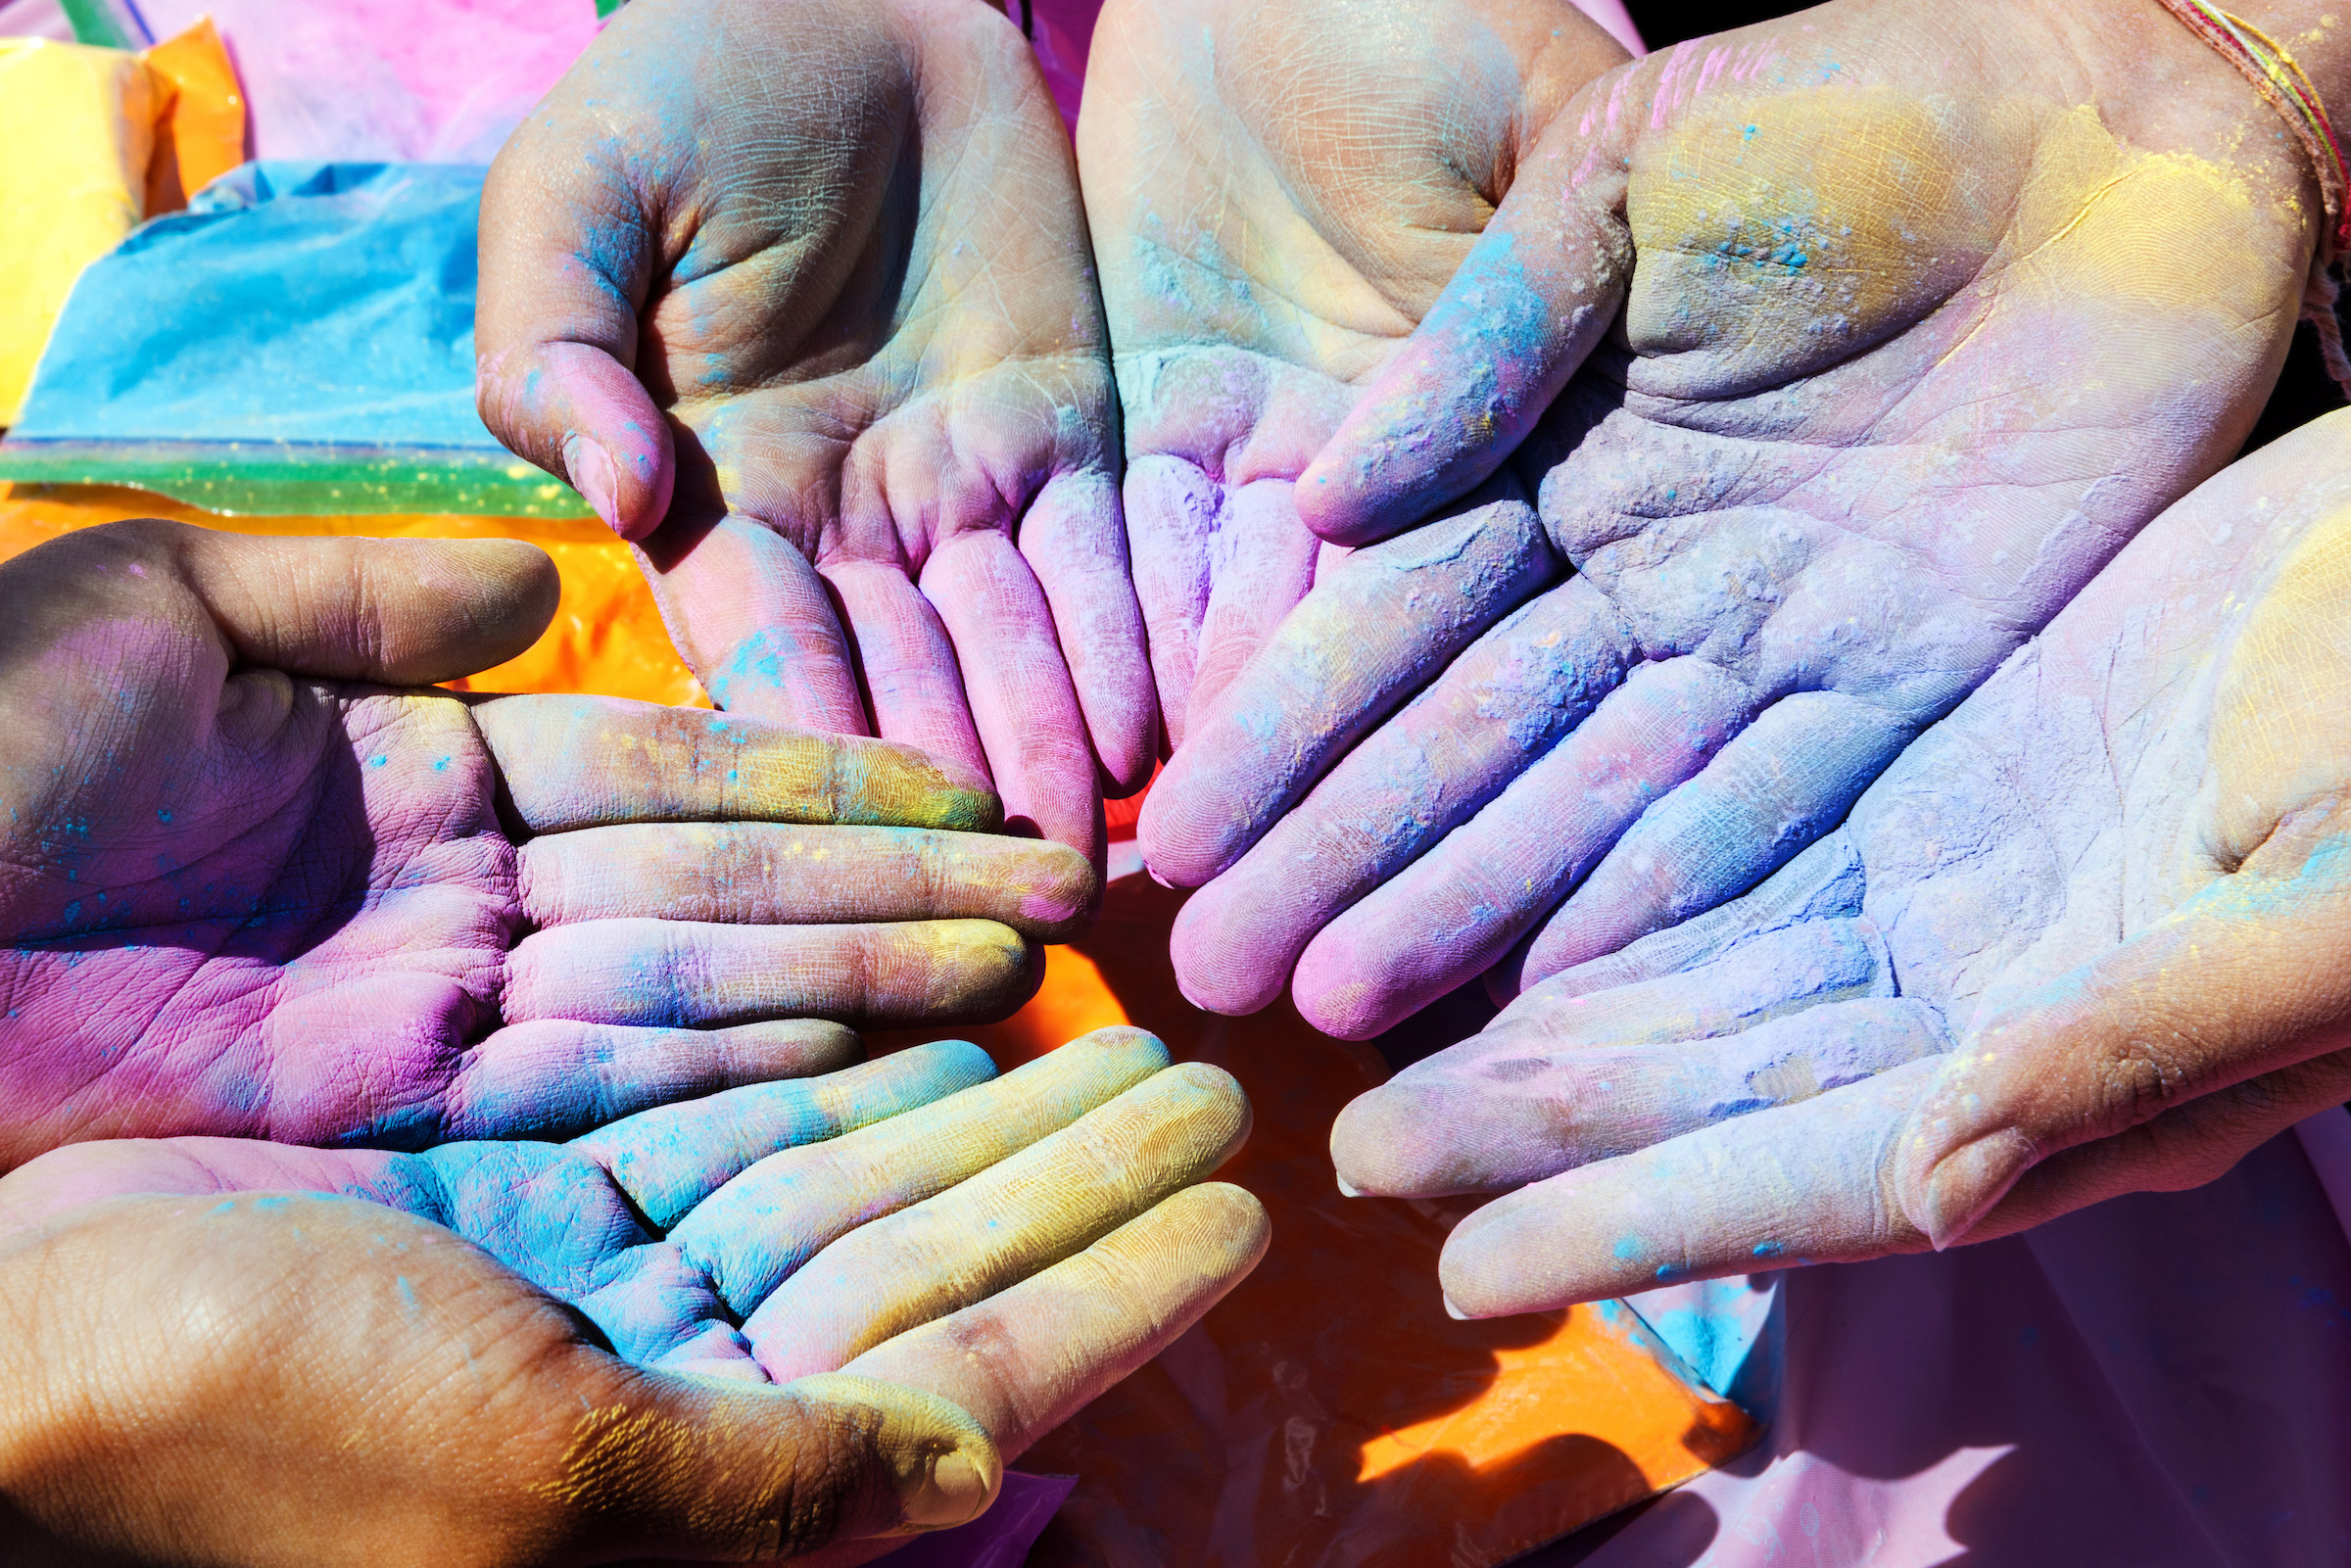 Several individuals holding the palms of their hands together covered in various colors.